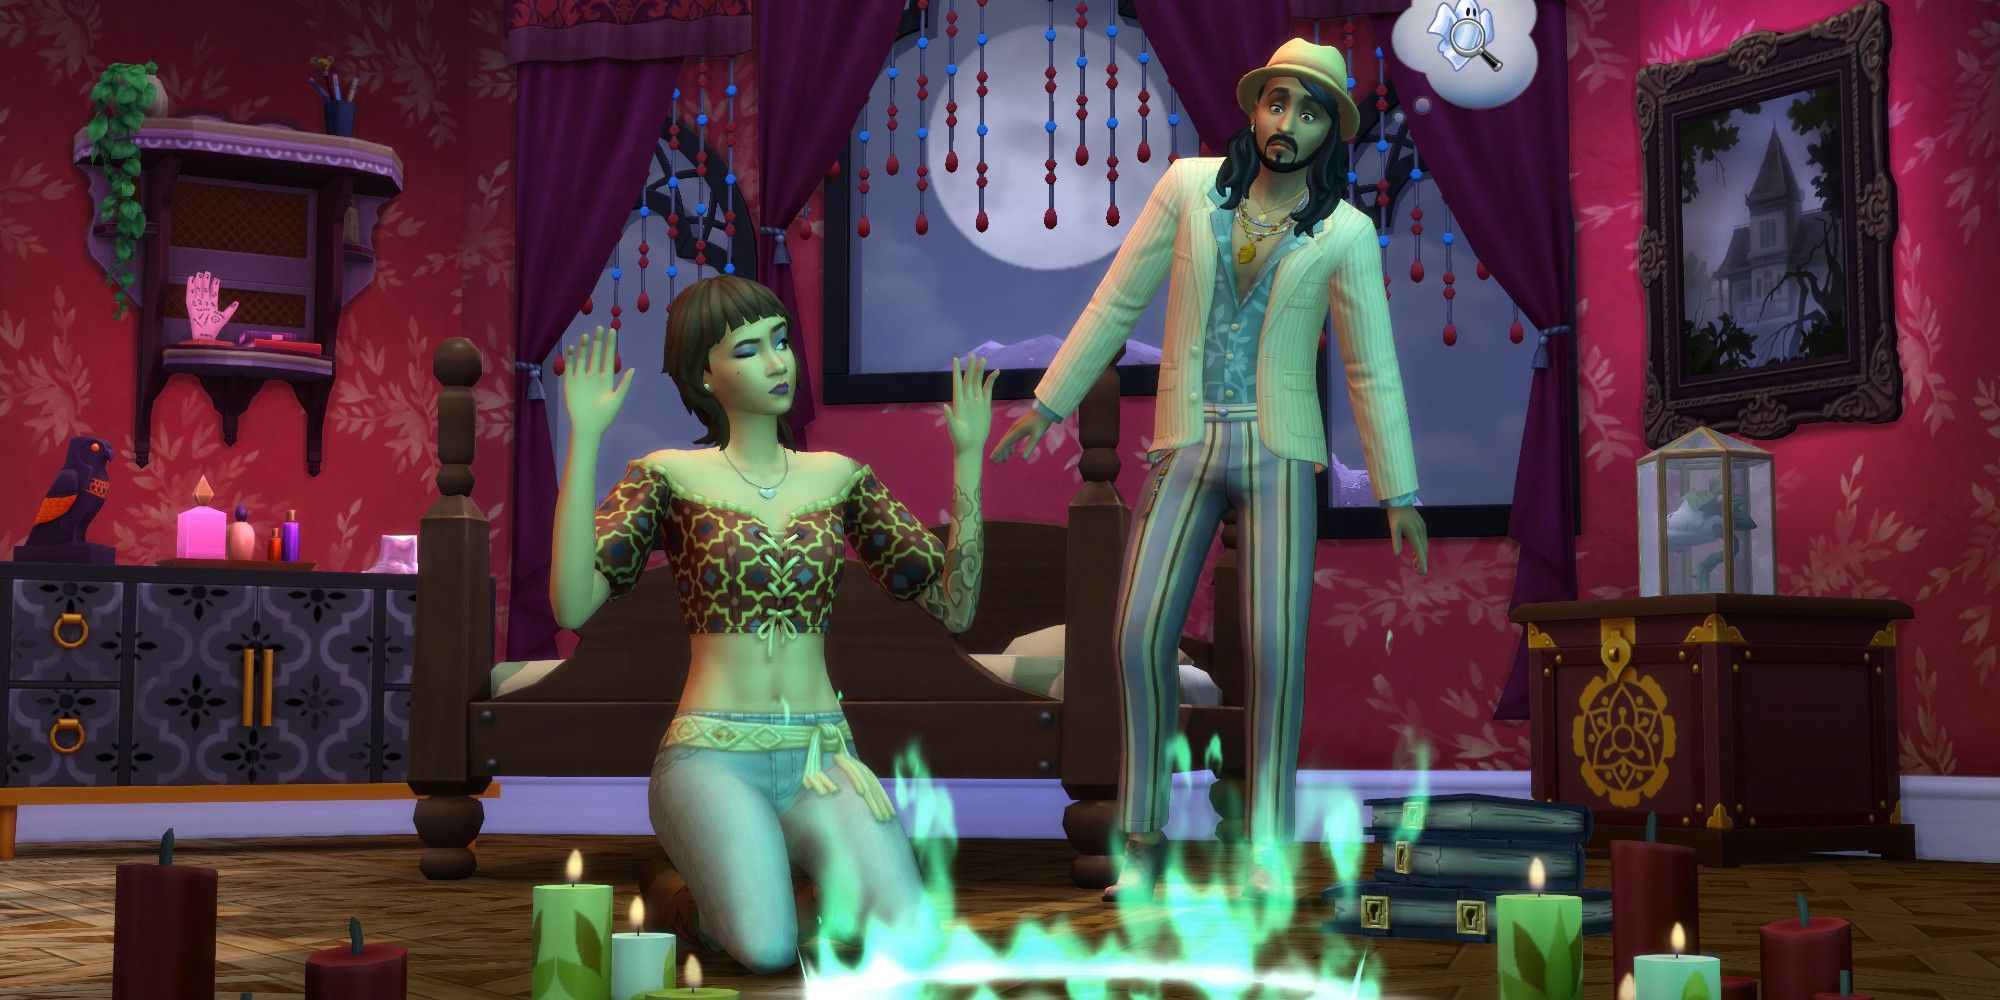 A Sim performs a seance in a summoning circle on the ground of a home while another Sim watches in The Sims 4: Paranormal Stuff